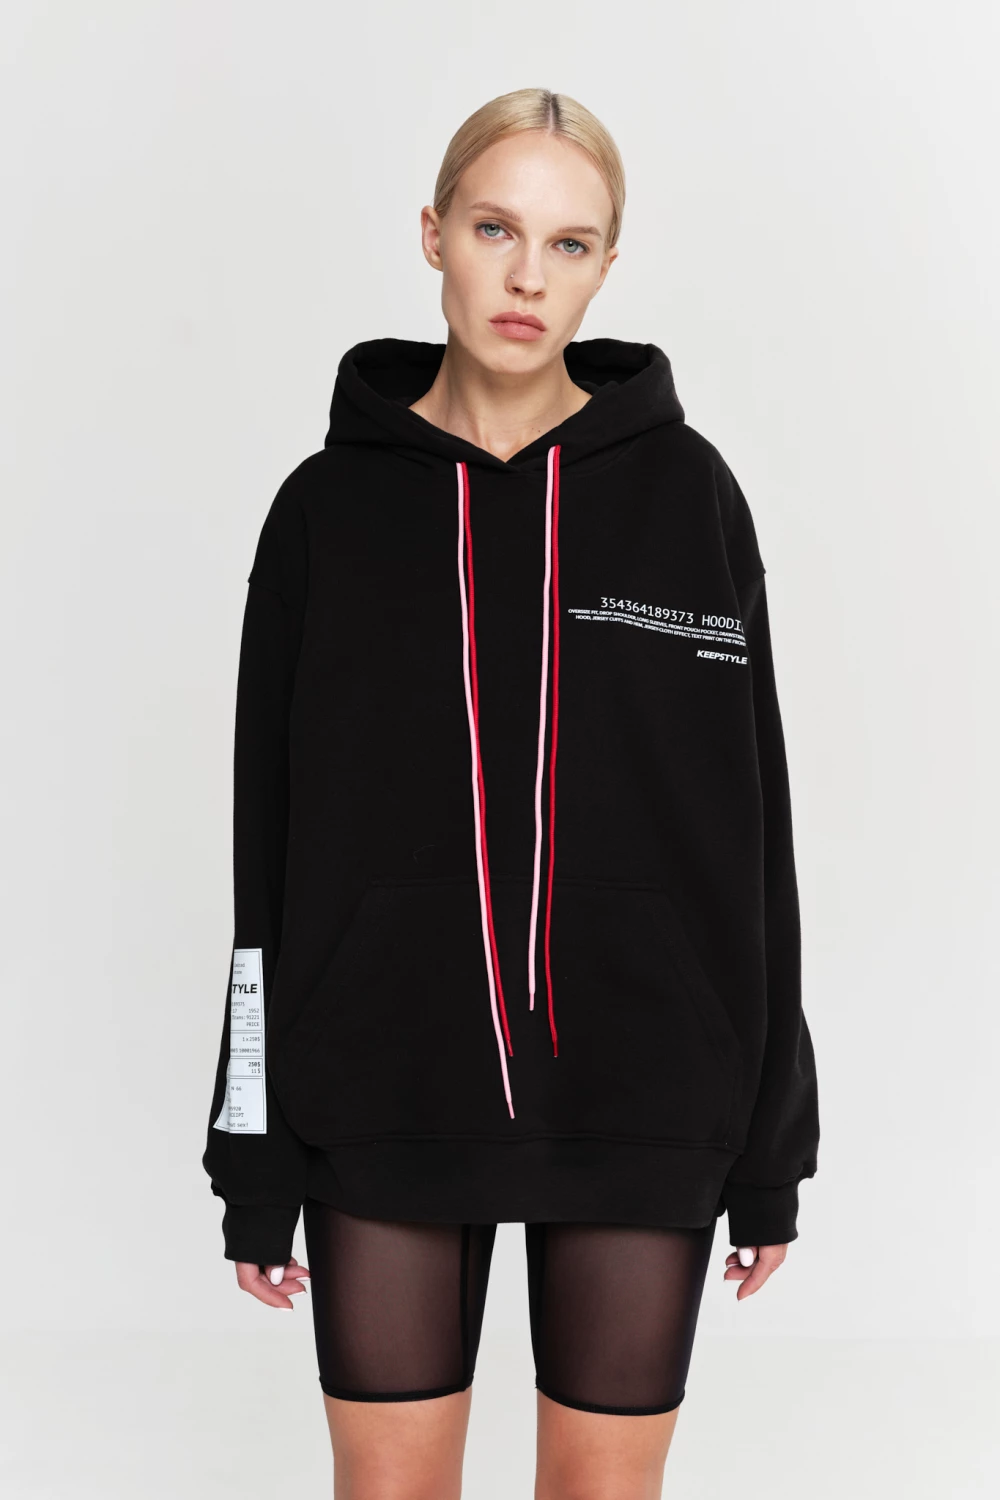 hoodie "shopping" in black color